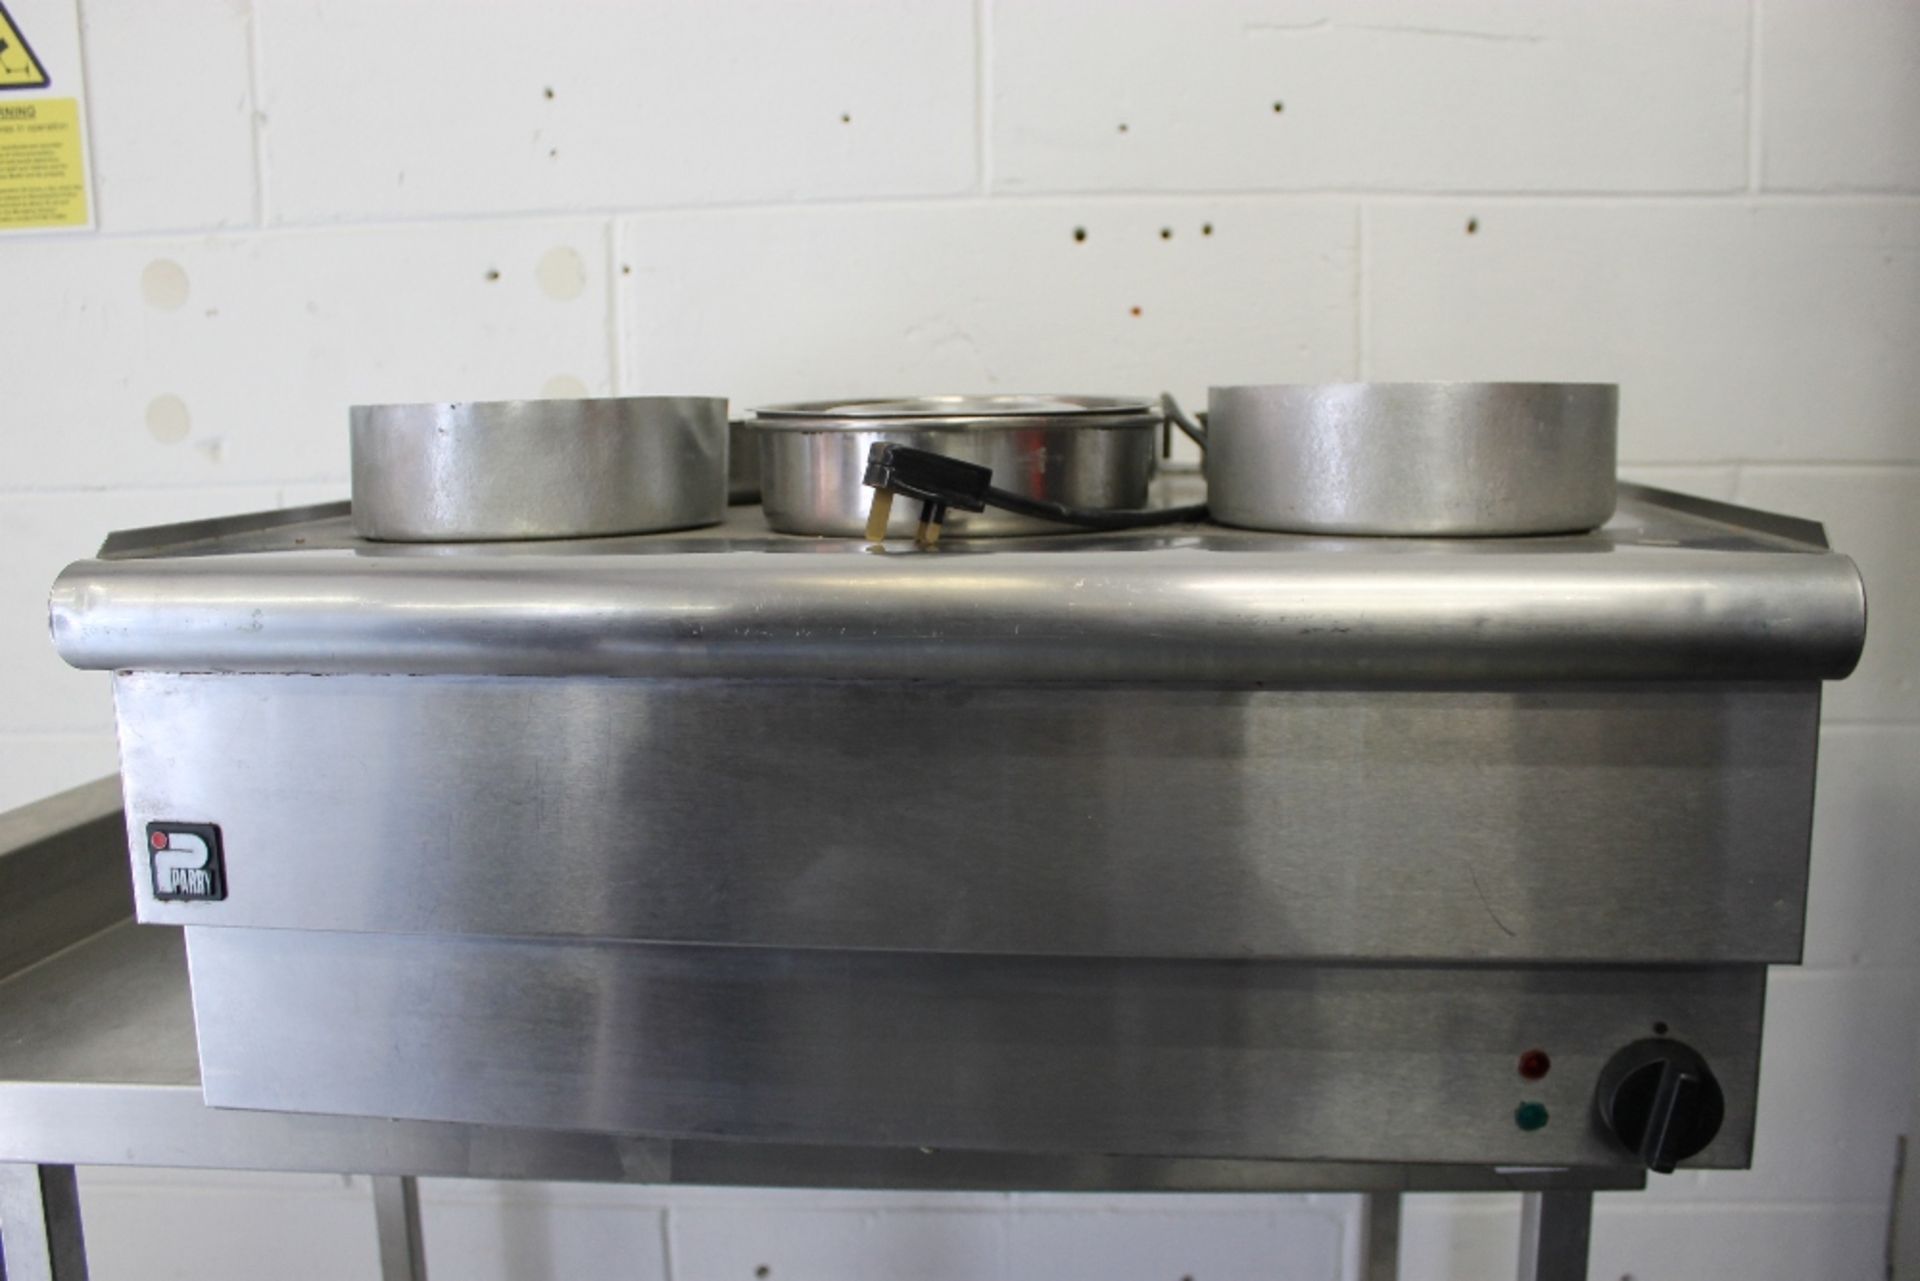 Parry Stainless Steel Six Pot Wet Well Bain Marie -1ph – Tested Working - Image 3 of 3